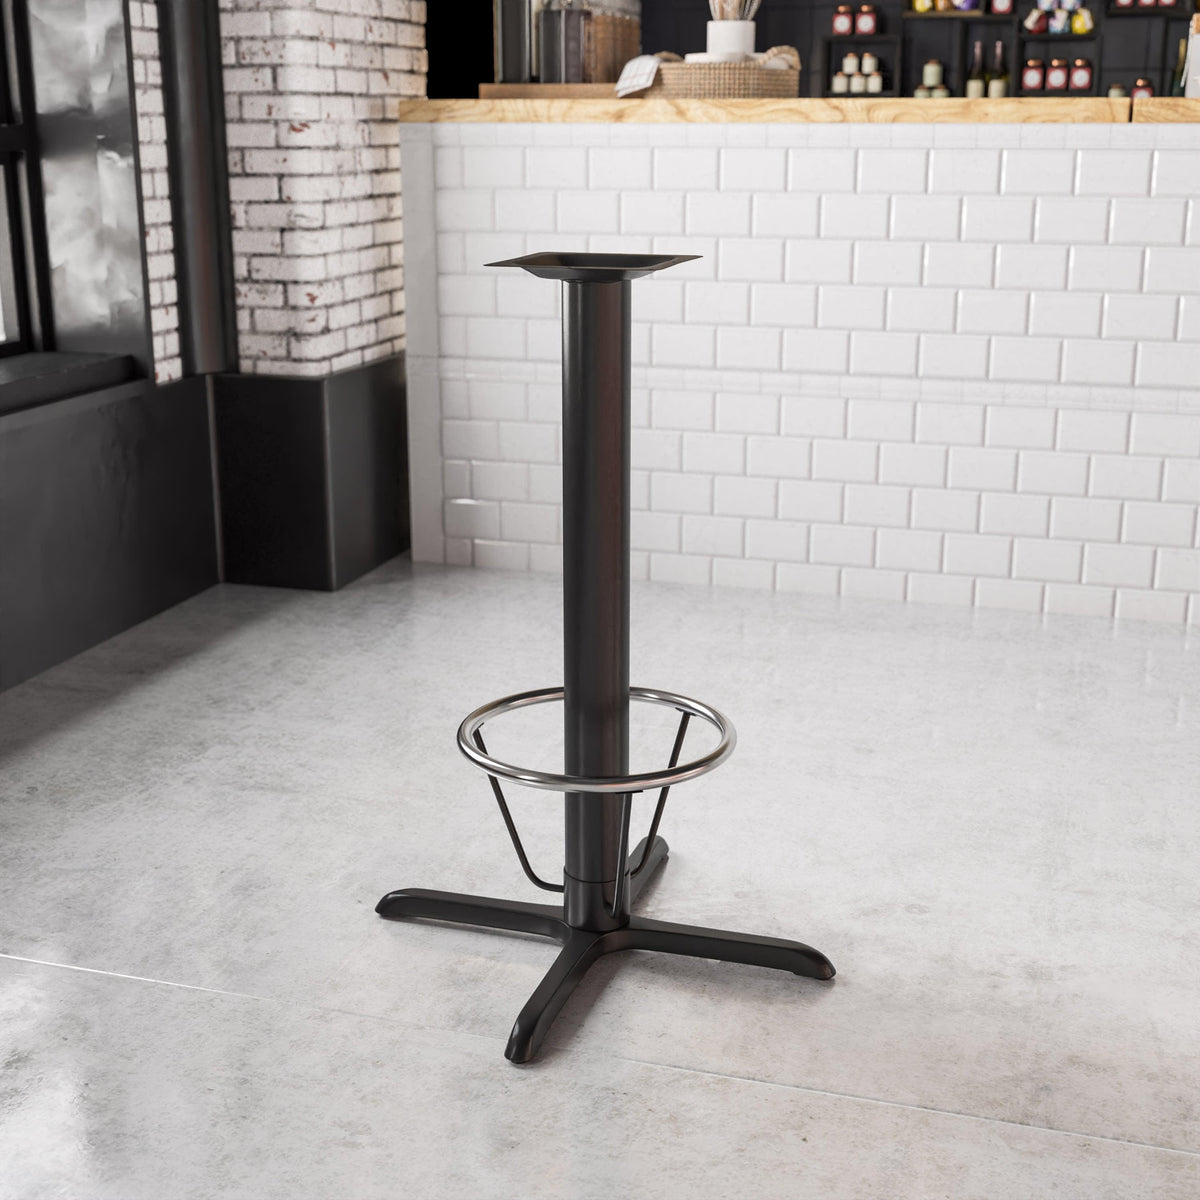 33inch x 33inch Restaurant Table X-Base with 4inch Dia. Bar Height Column & Foot Ring